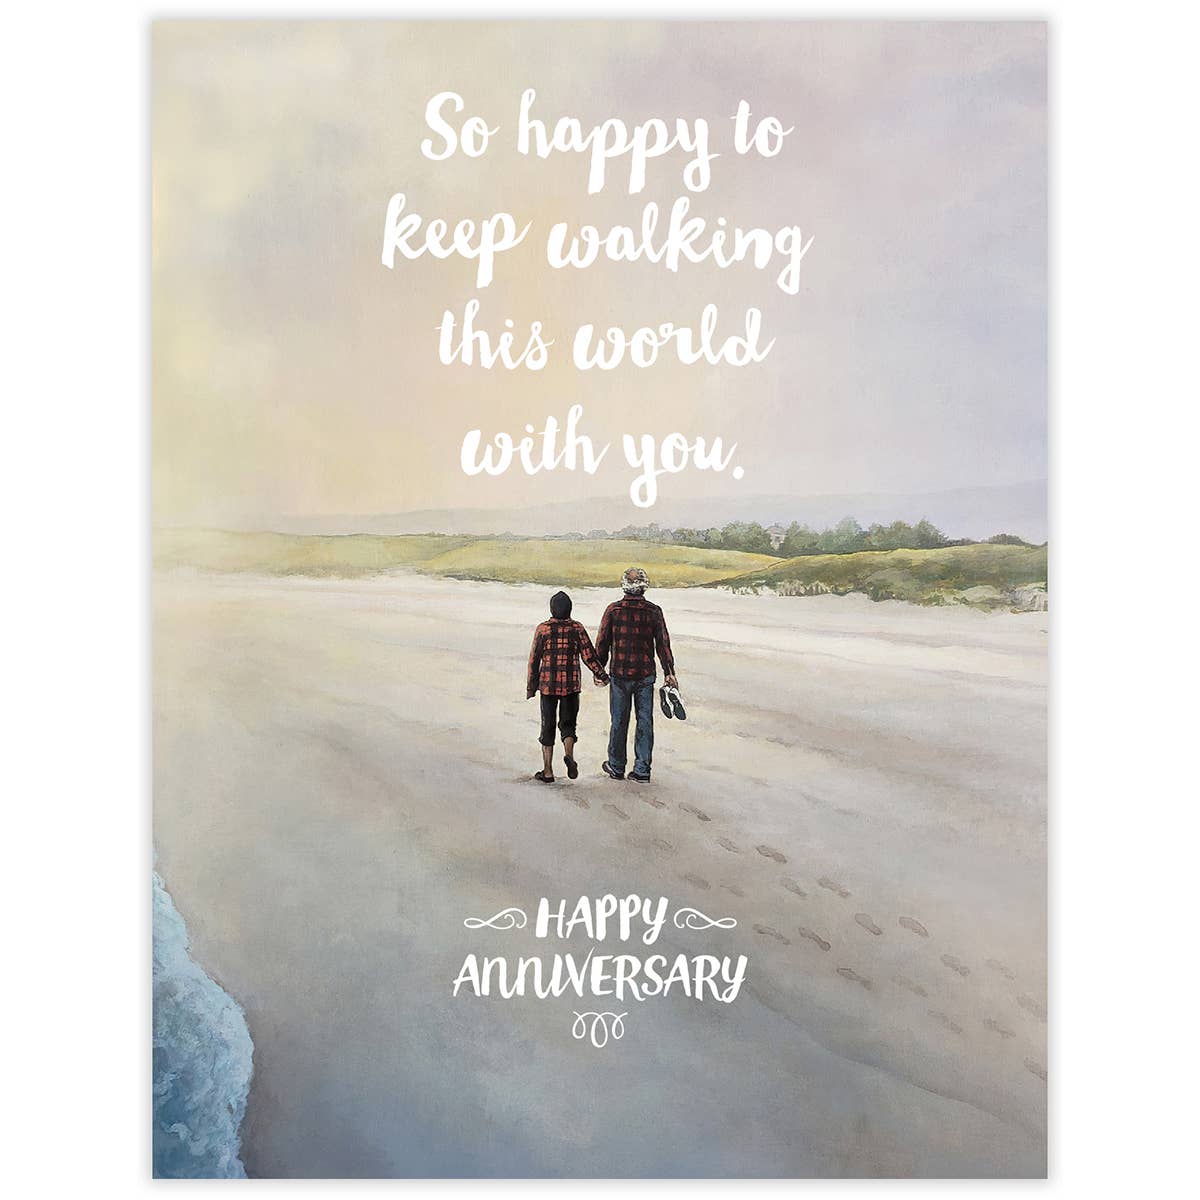 Keep Walking with you - Anniversary Card